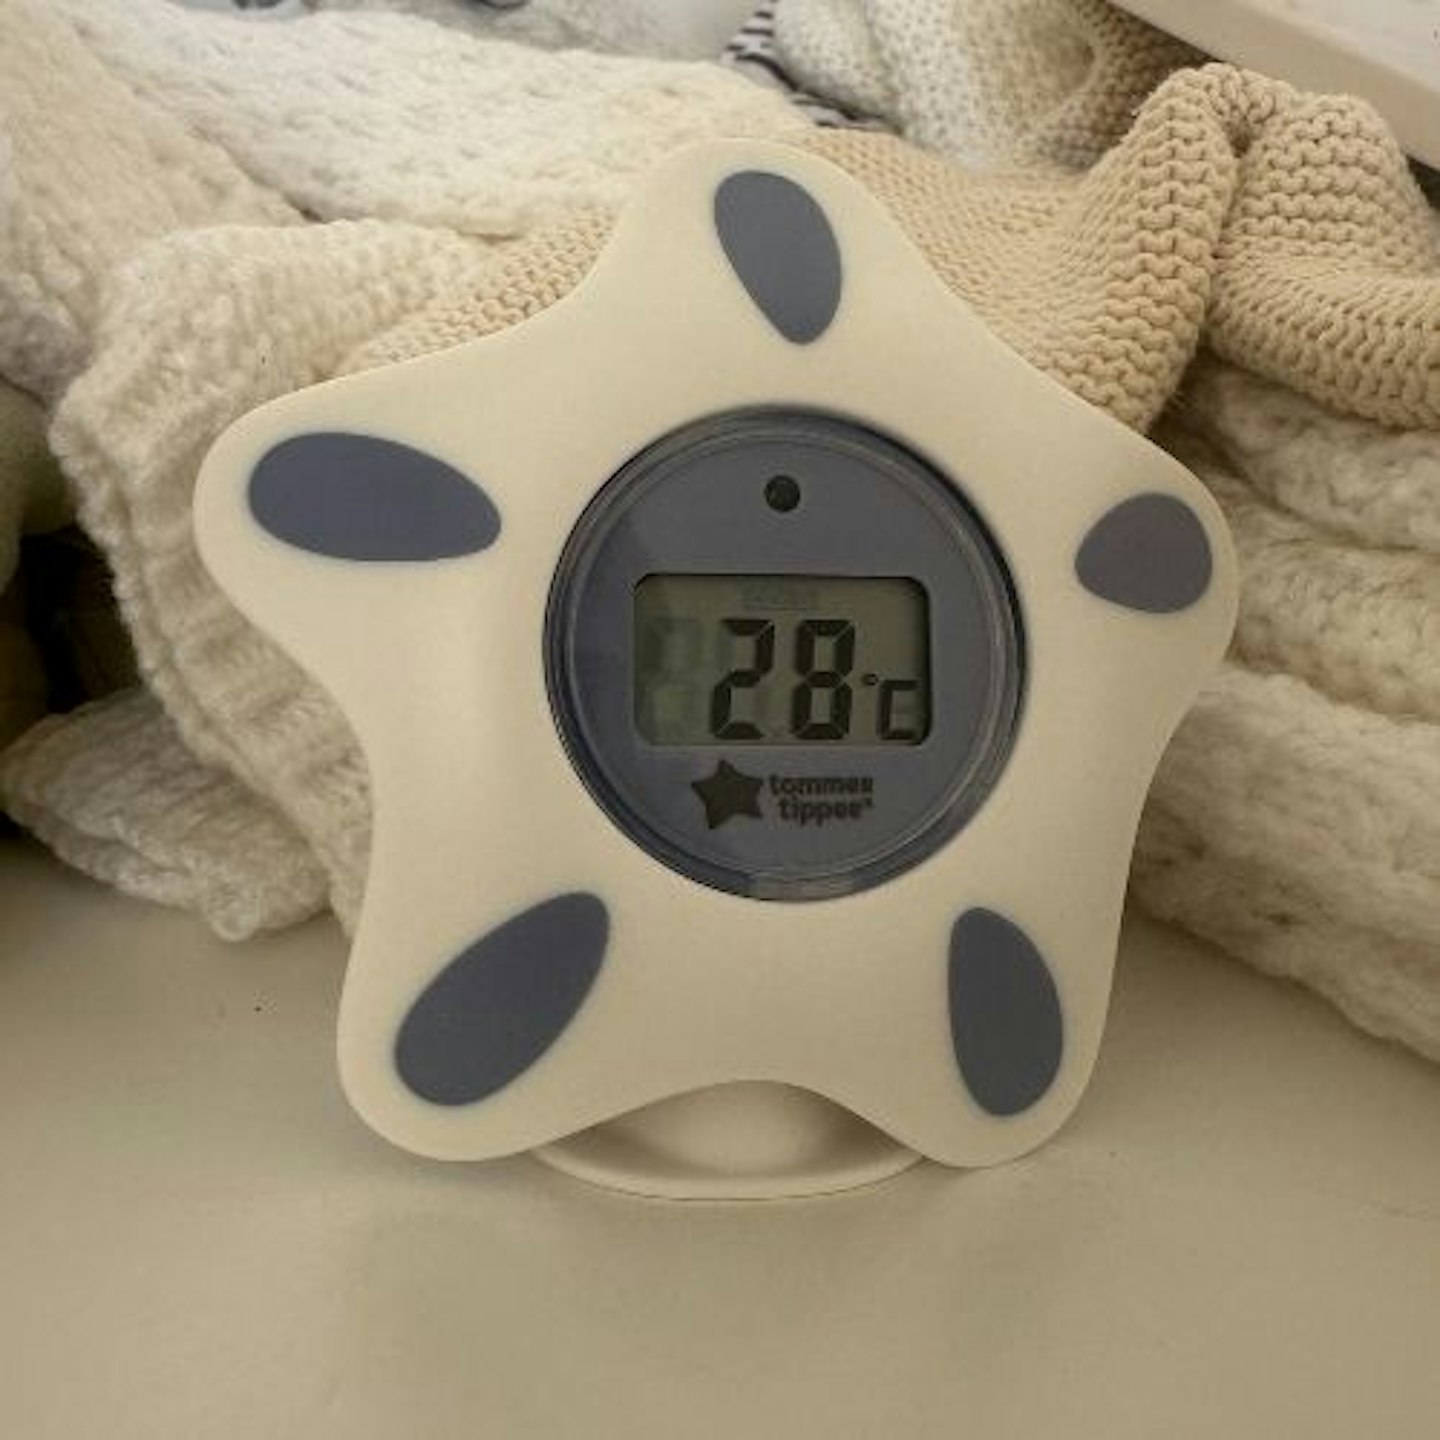 Tommee Tippee Closer to Nature Digital Bath and Room Thermometer